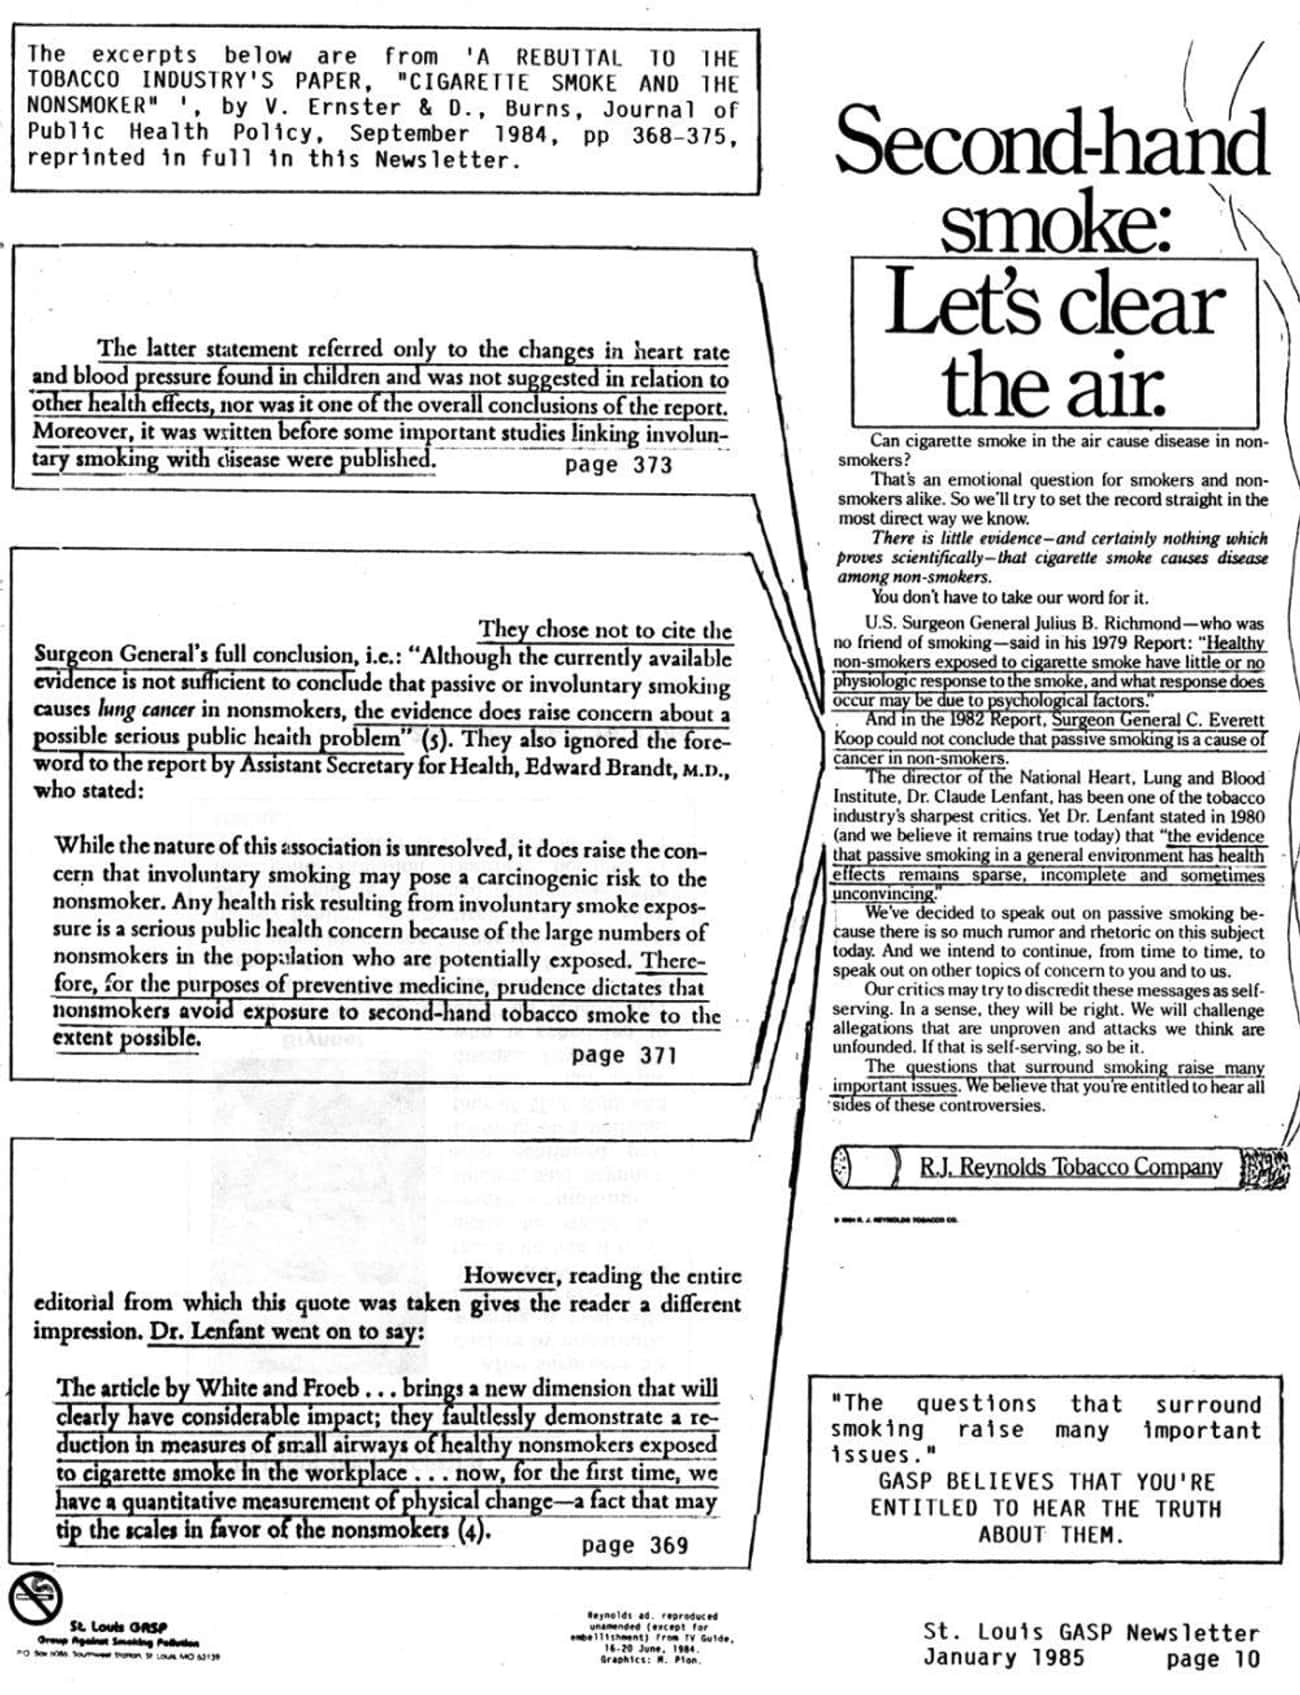 R. J. Reynolds Responded With A Series Of Full-Page Ads Called 'Let's Clear The Air On Smoking' To Clarify Smoking Is For Adults